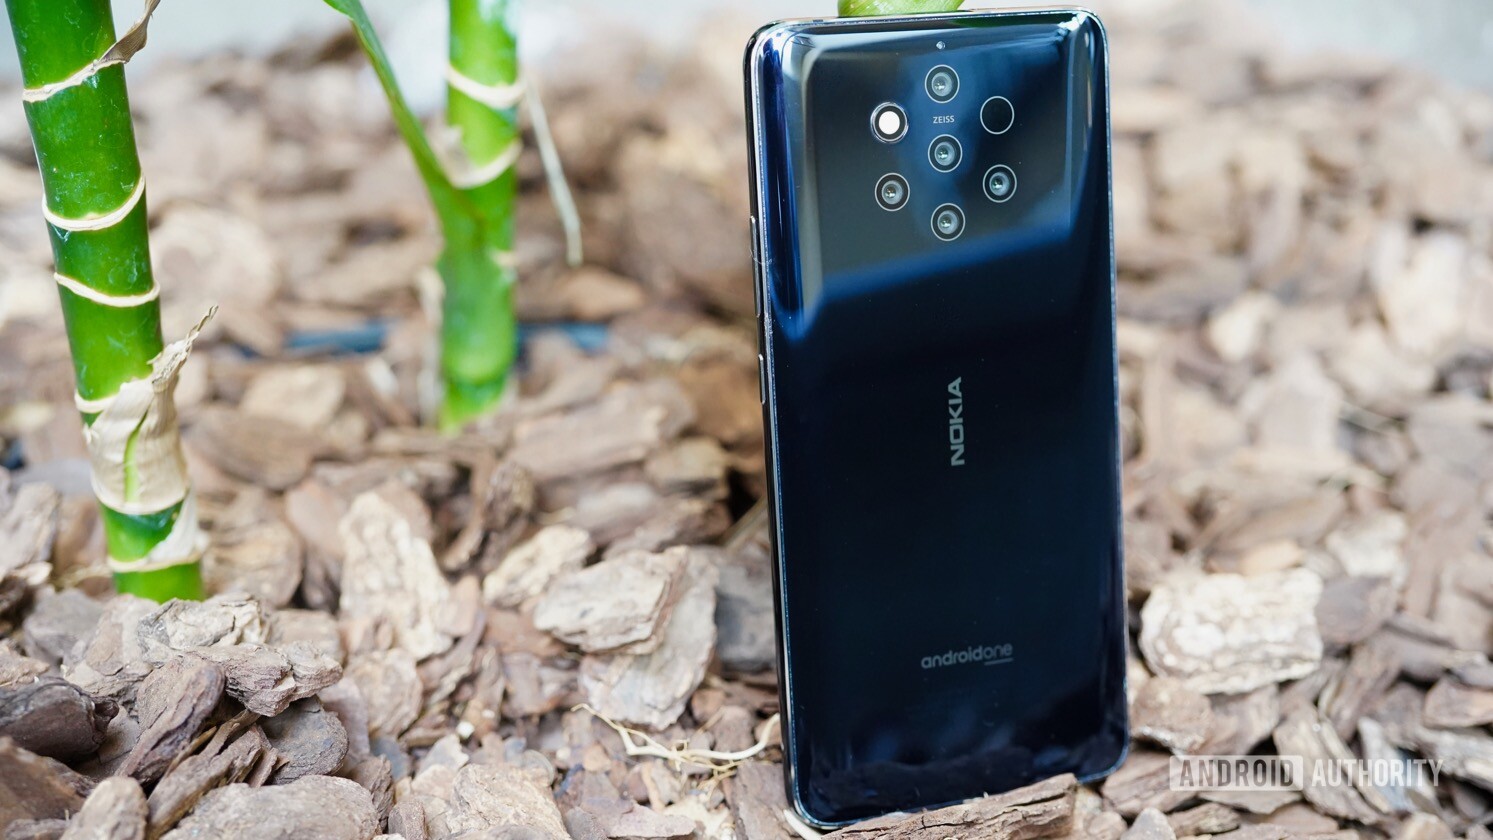 Bacskide of the Nokia 9 PureView showing the five camera setup.